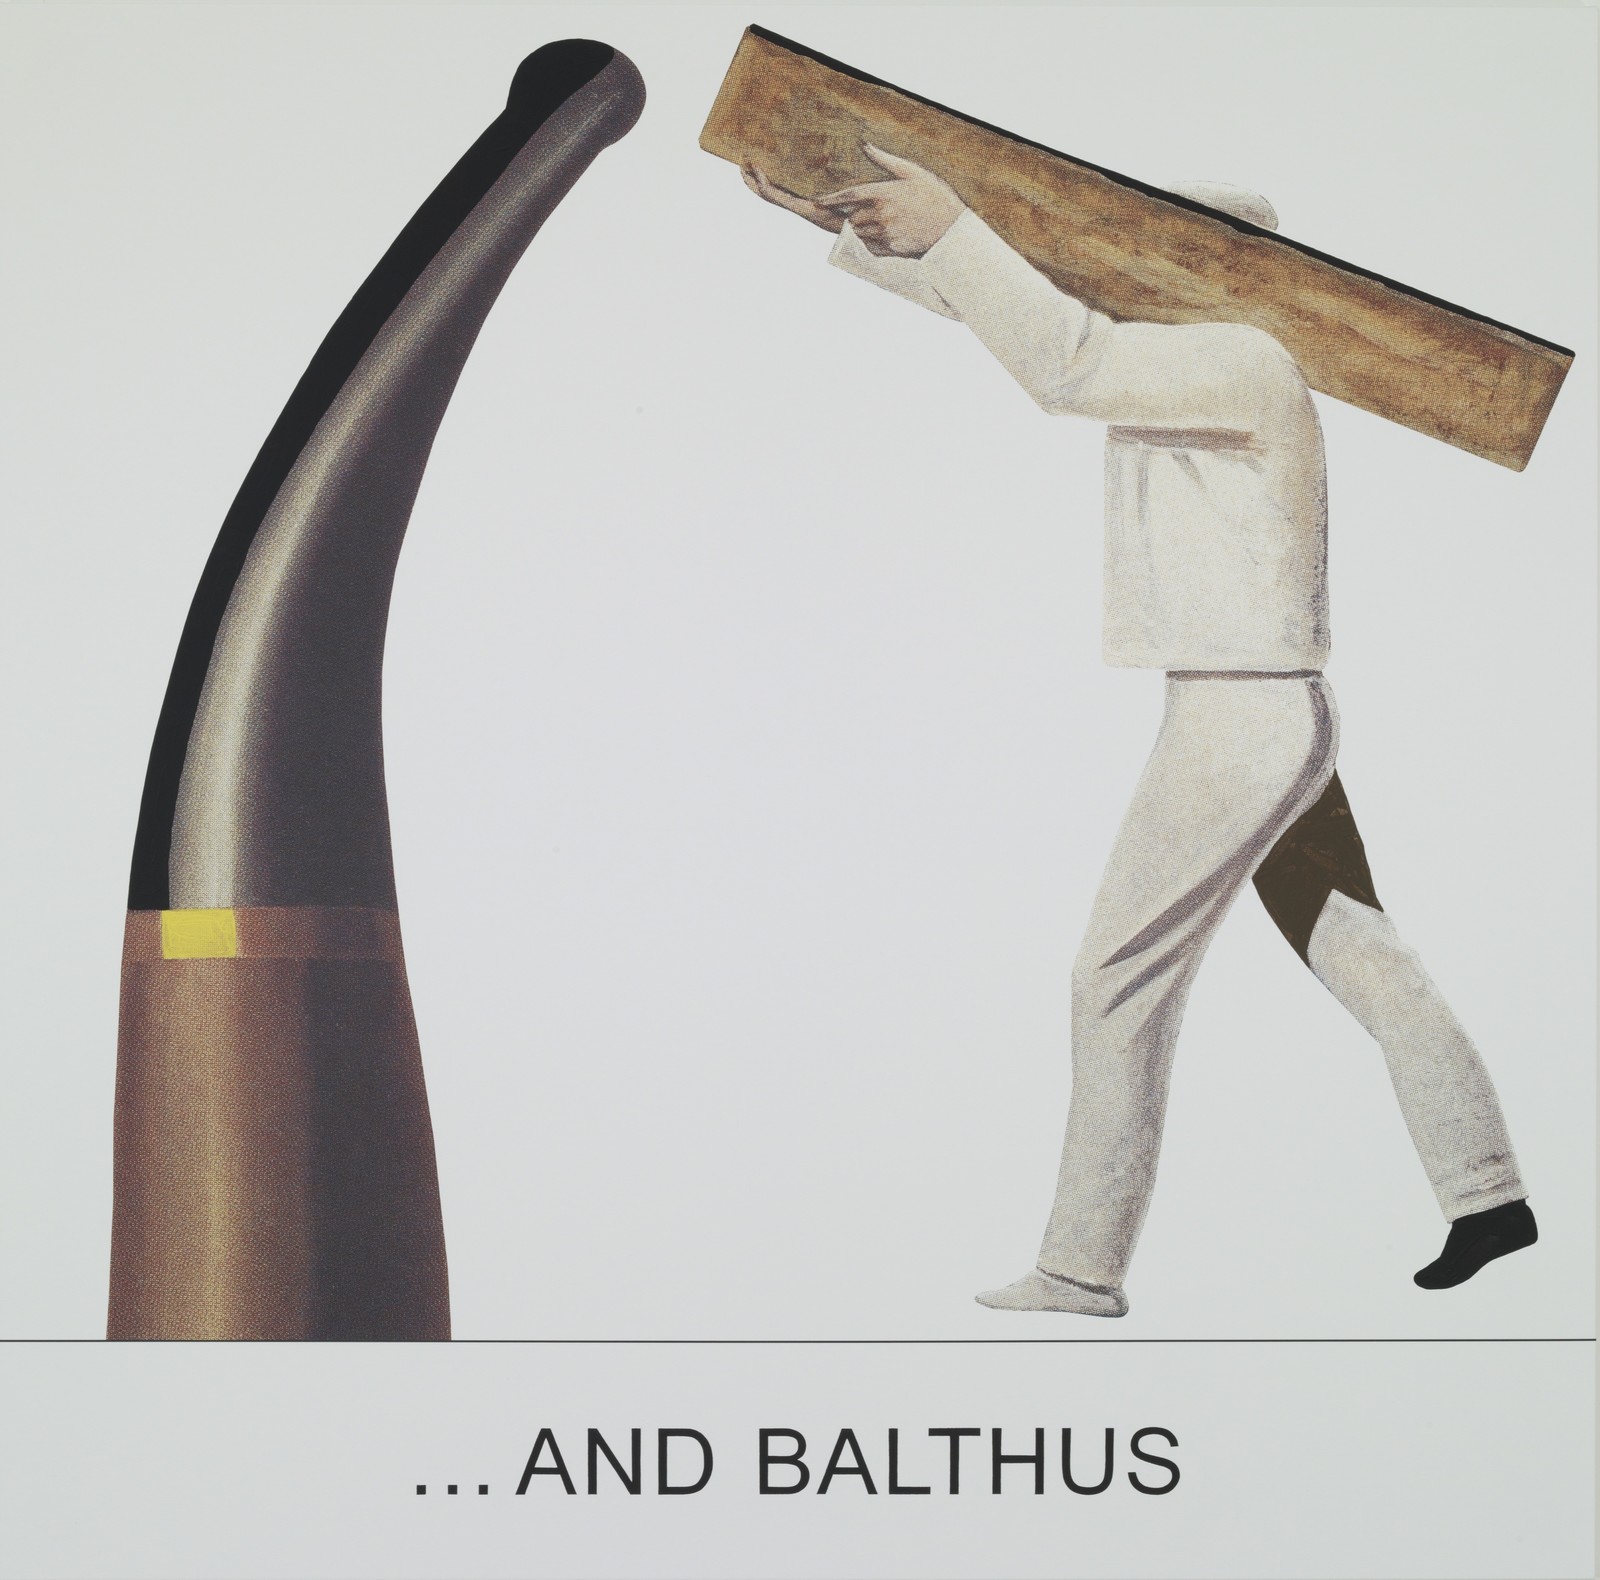 John BaldessariDouble Bill:...And Balthus, 2012Varnished inkjet print on canvas with acrylic and oil paint59 x 60 in. (149.86 x 152.4 cm)Courtesy of the artist and Marian Goodman Gallery